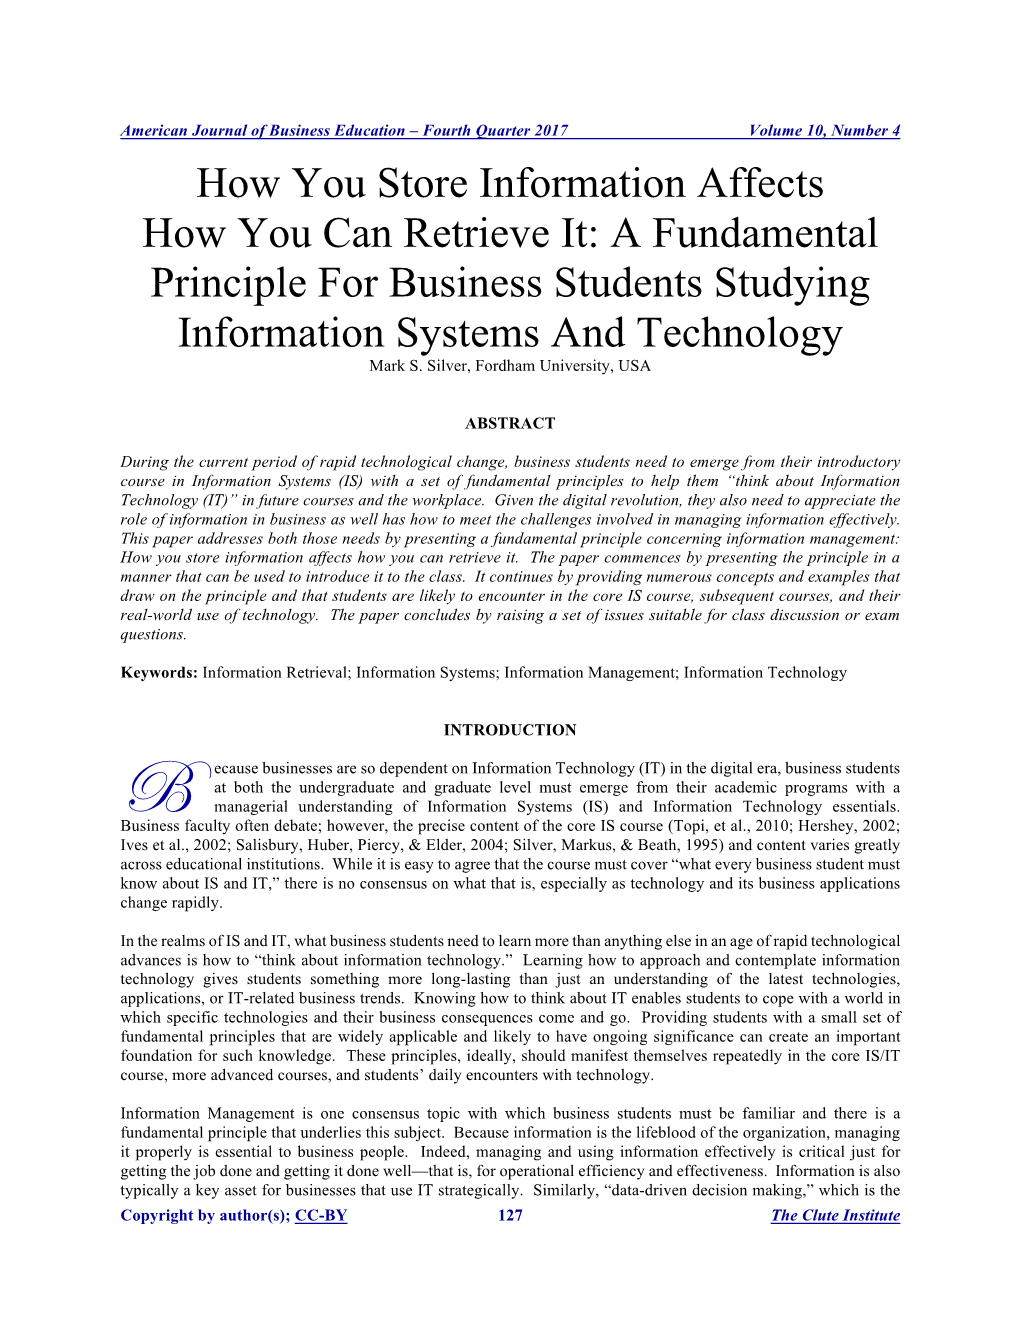 How You Store Information Affects How You Can Retrieve It: a Fundamental Principle for Business Students Studying Information Systems and Technology Mark S